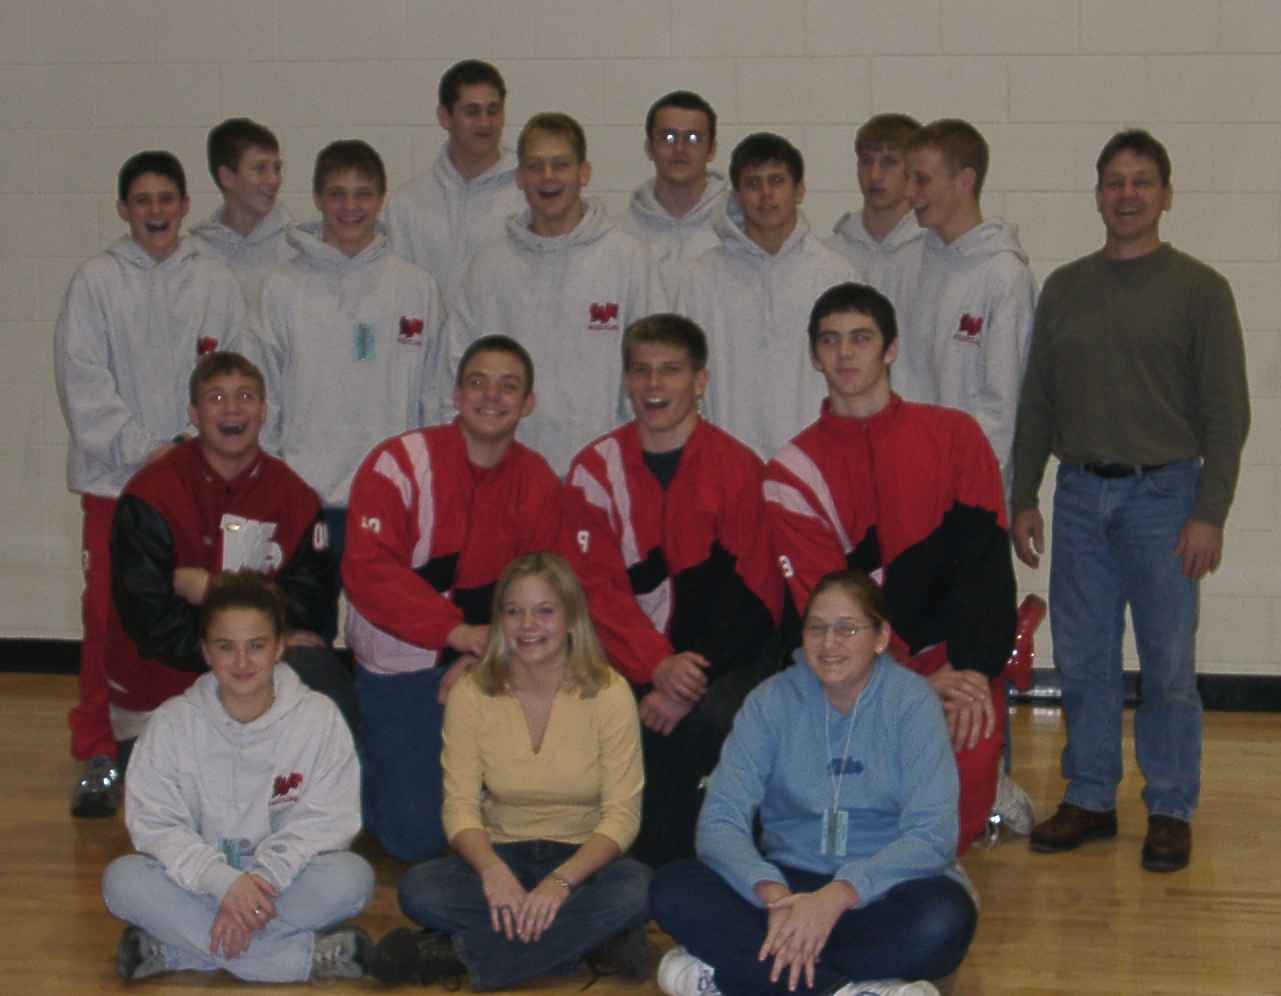 Wrestling Team, Coach, & Managers at Mid-States Tournament  12/29/01